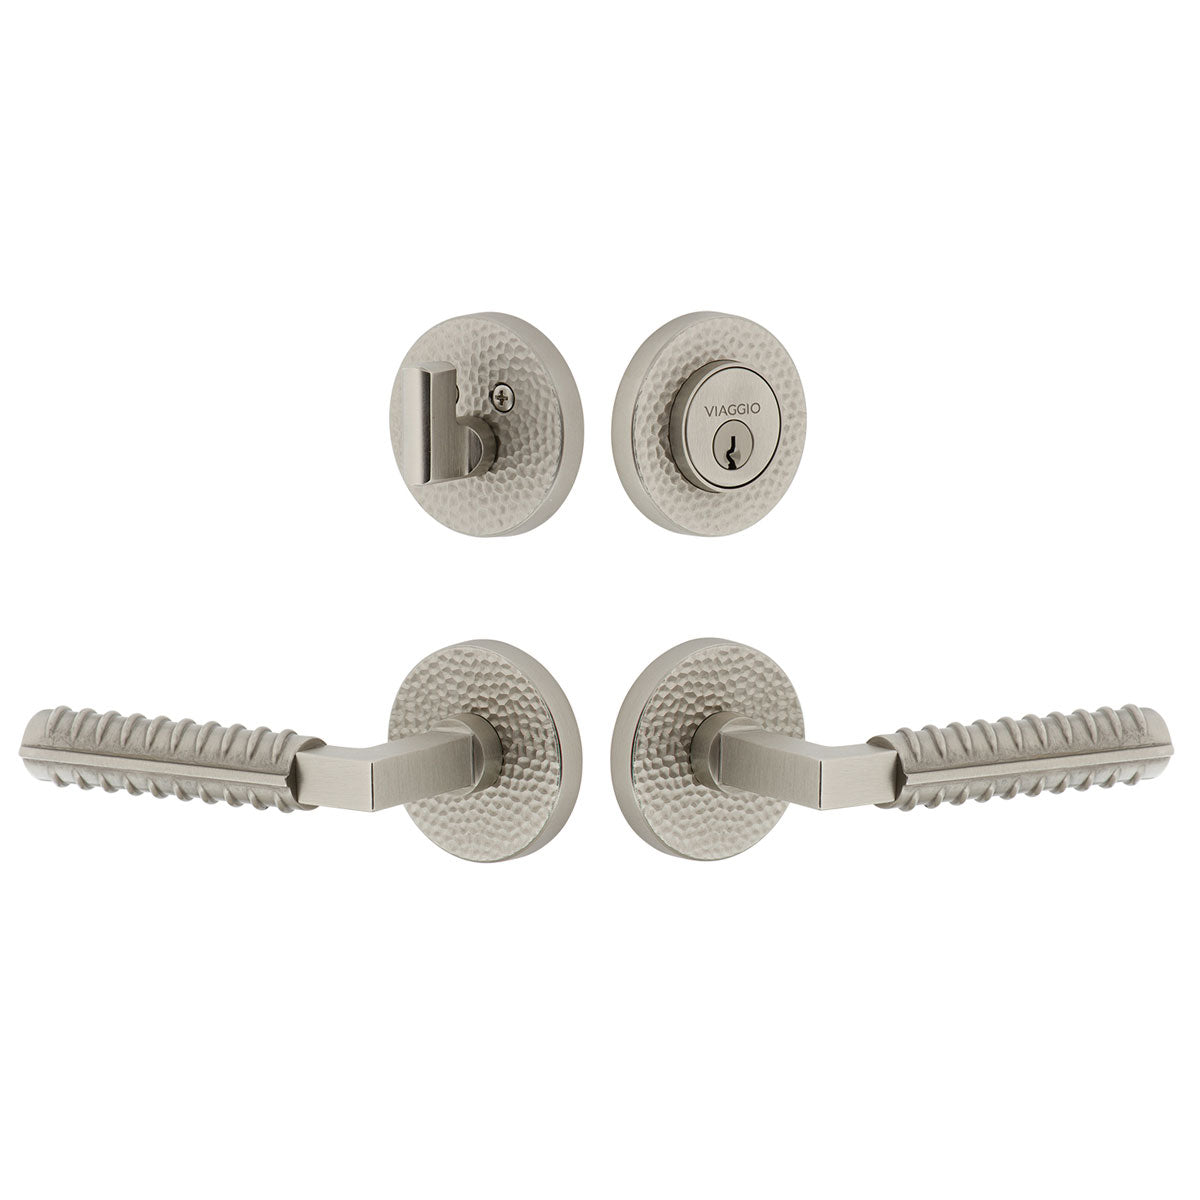 Circolo Hammered Rosette Entry Set with Contempo Rebar Lever in Satin Nickel